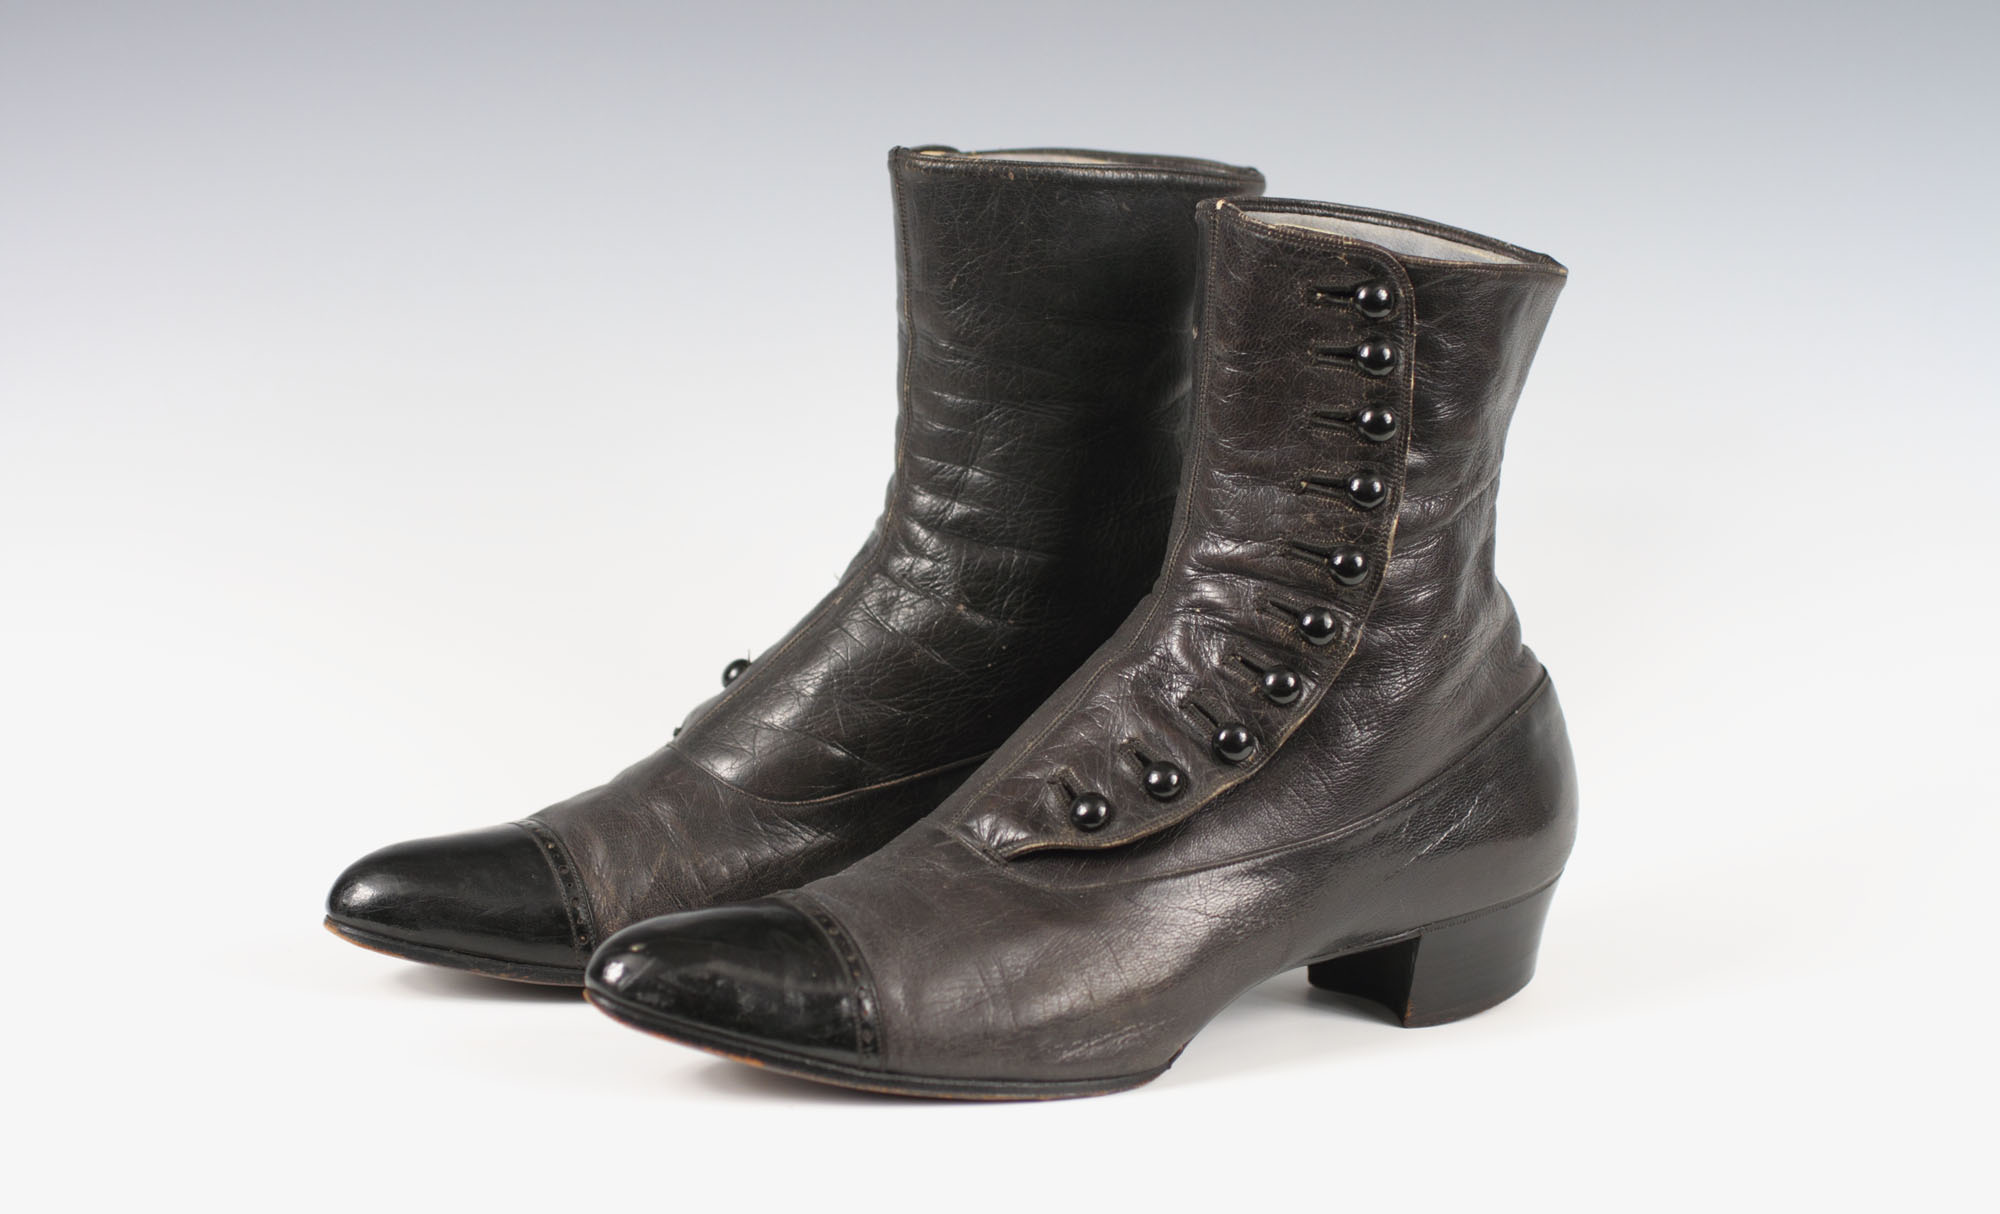 Black Leather Boots - Albany Institute of History and Art